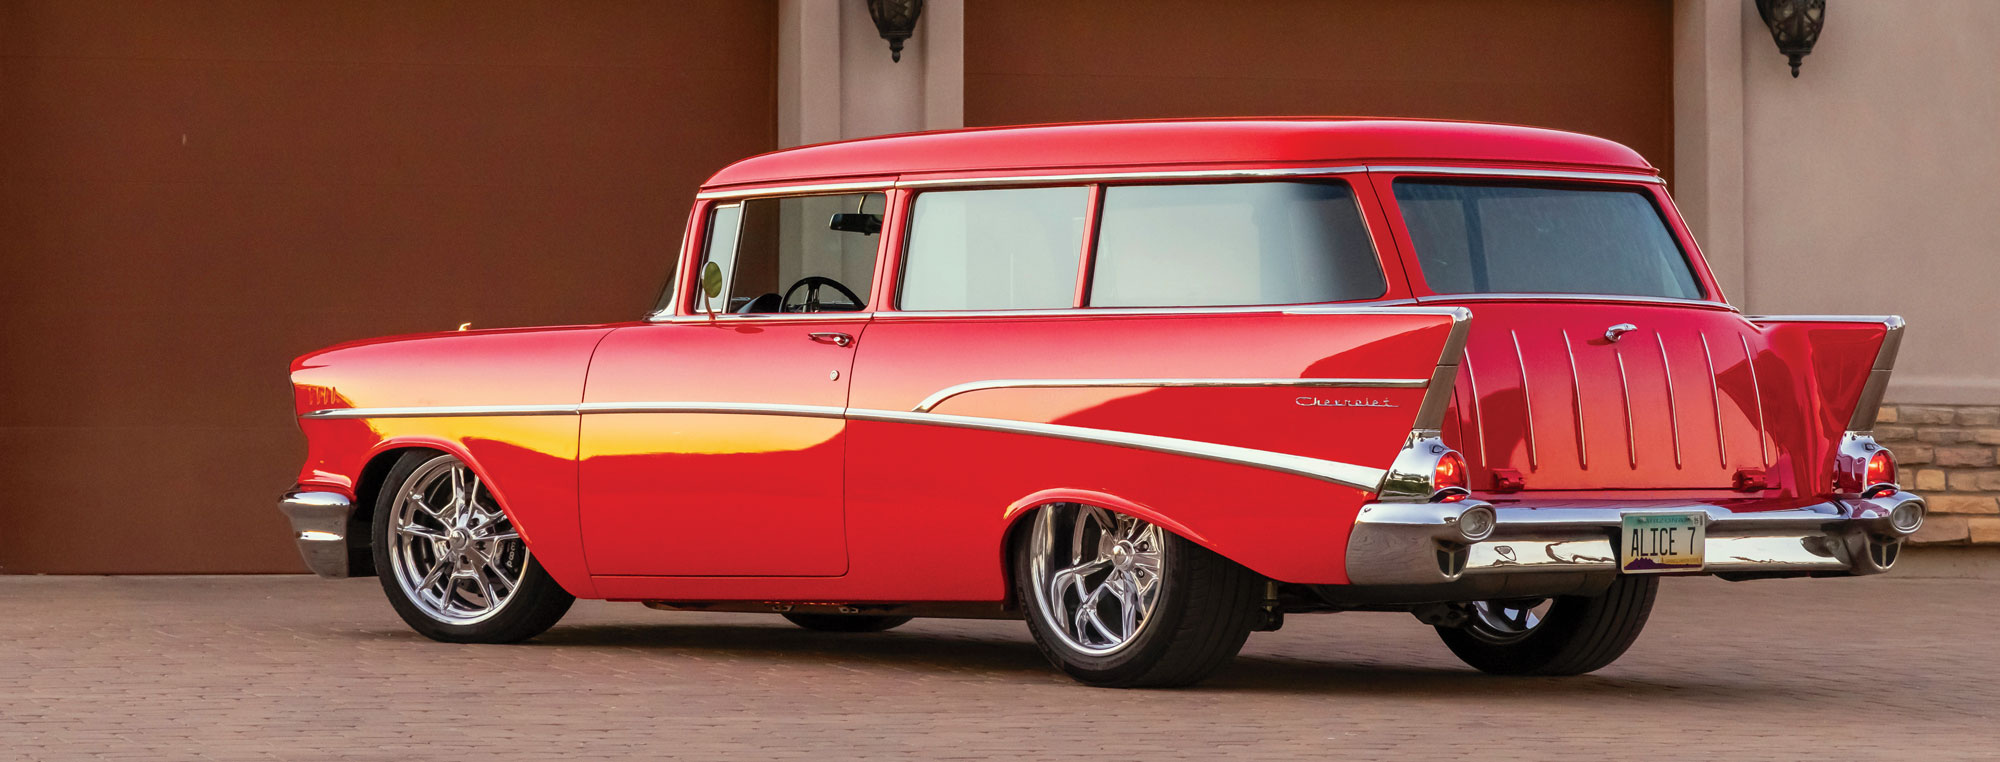 ’57 Chevy Wagon back view